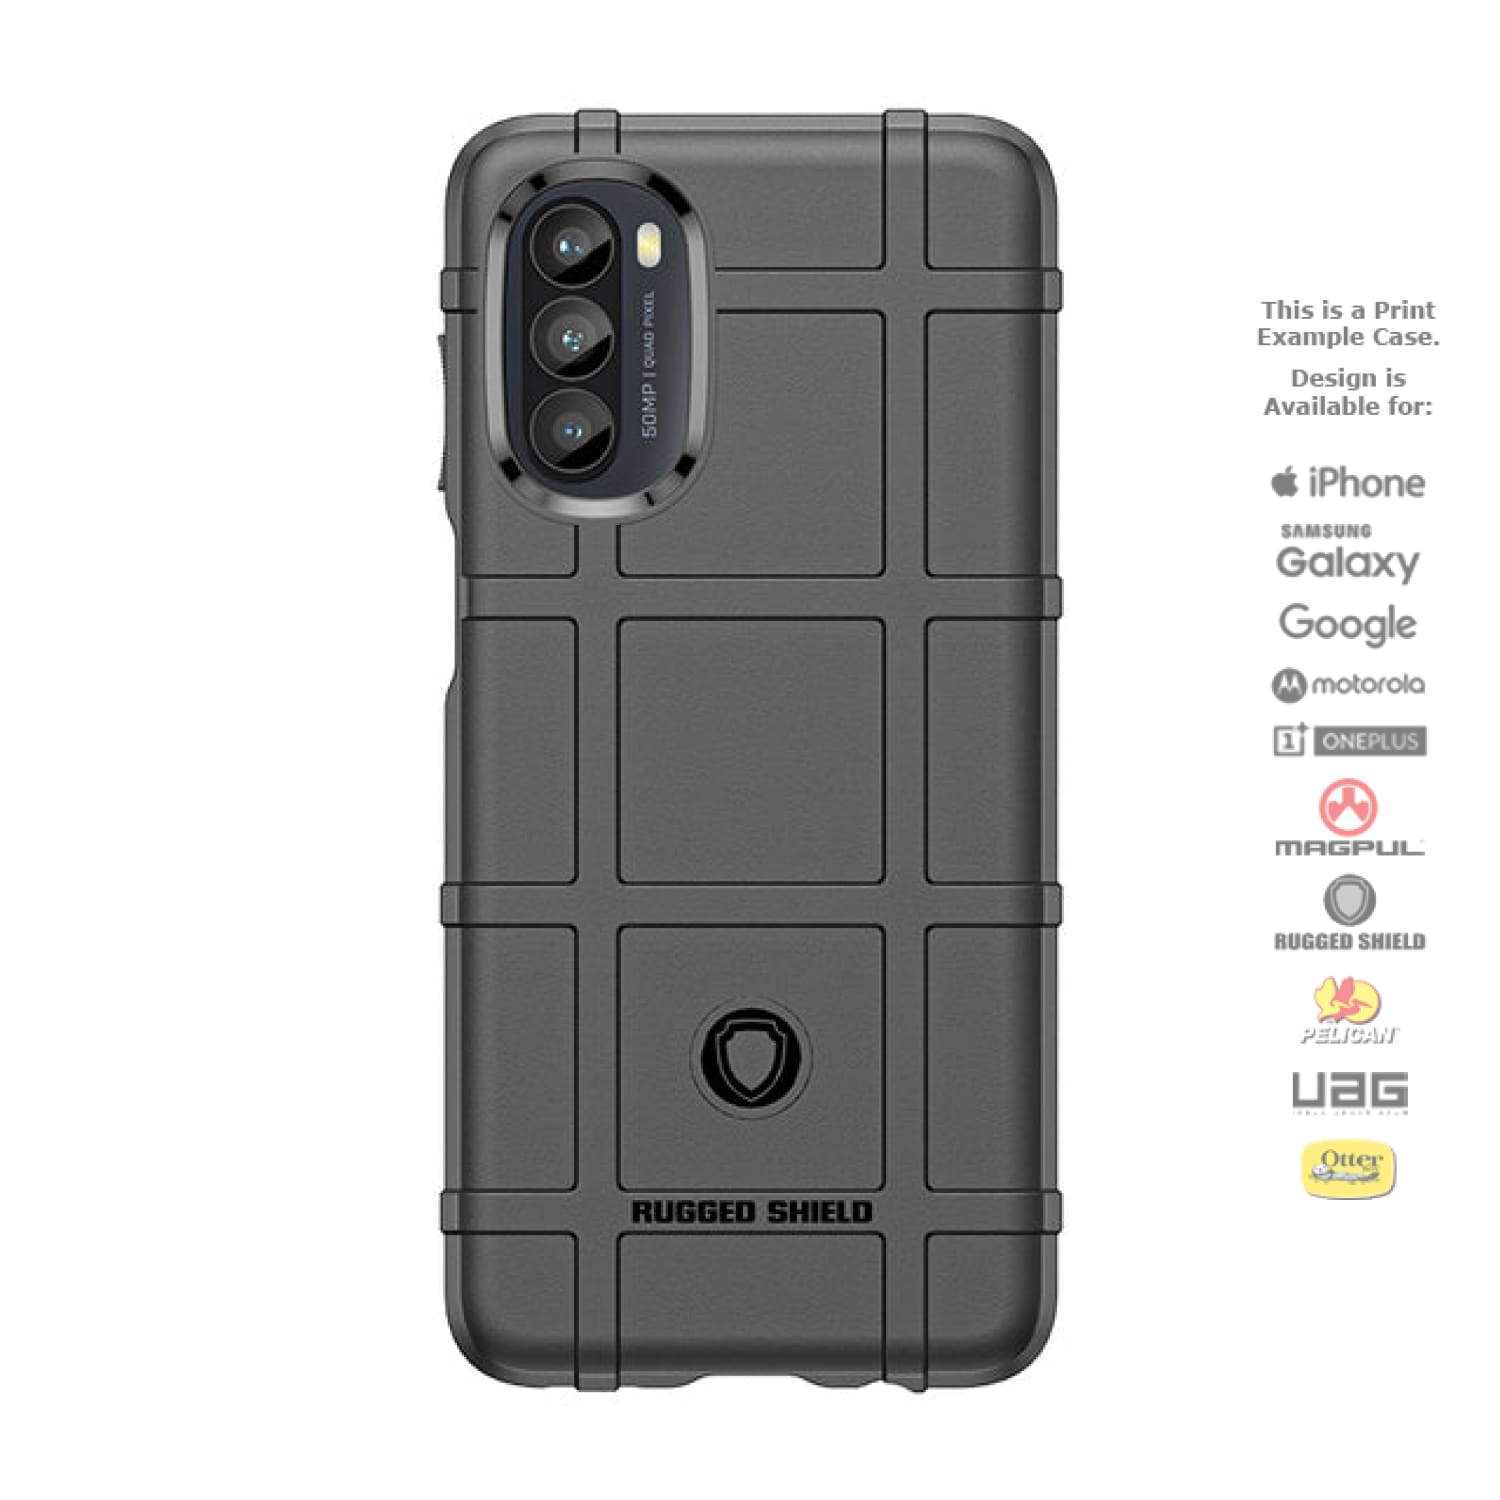 Rugged Shield Branded Solid Color TPU Cases for Motorola Phone Models